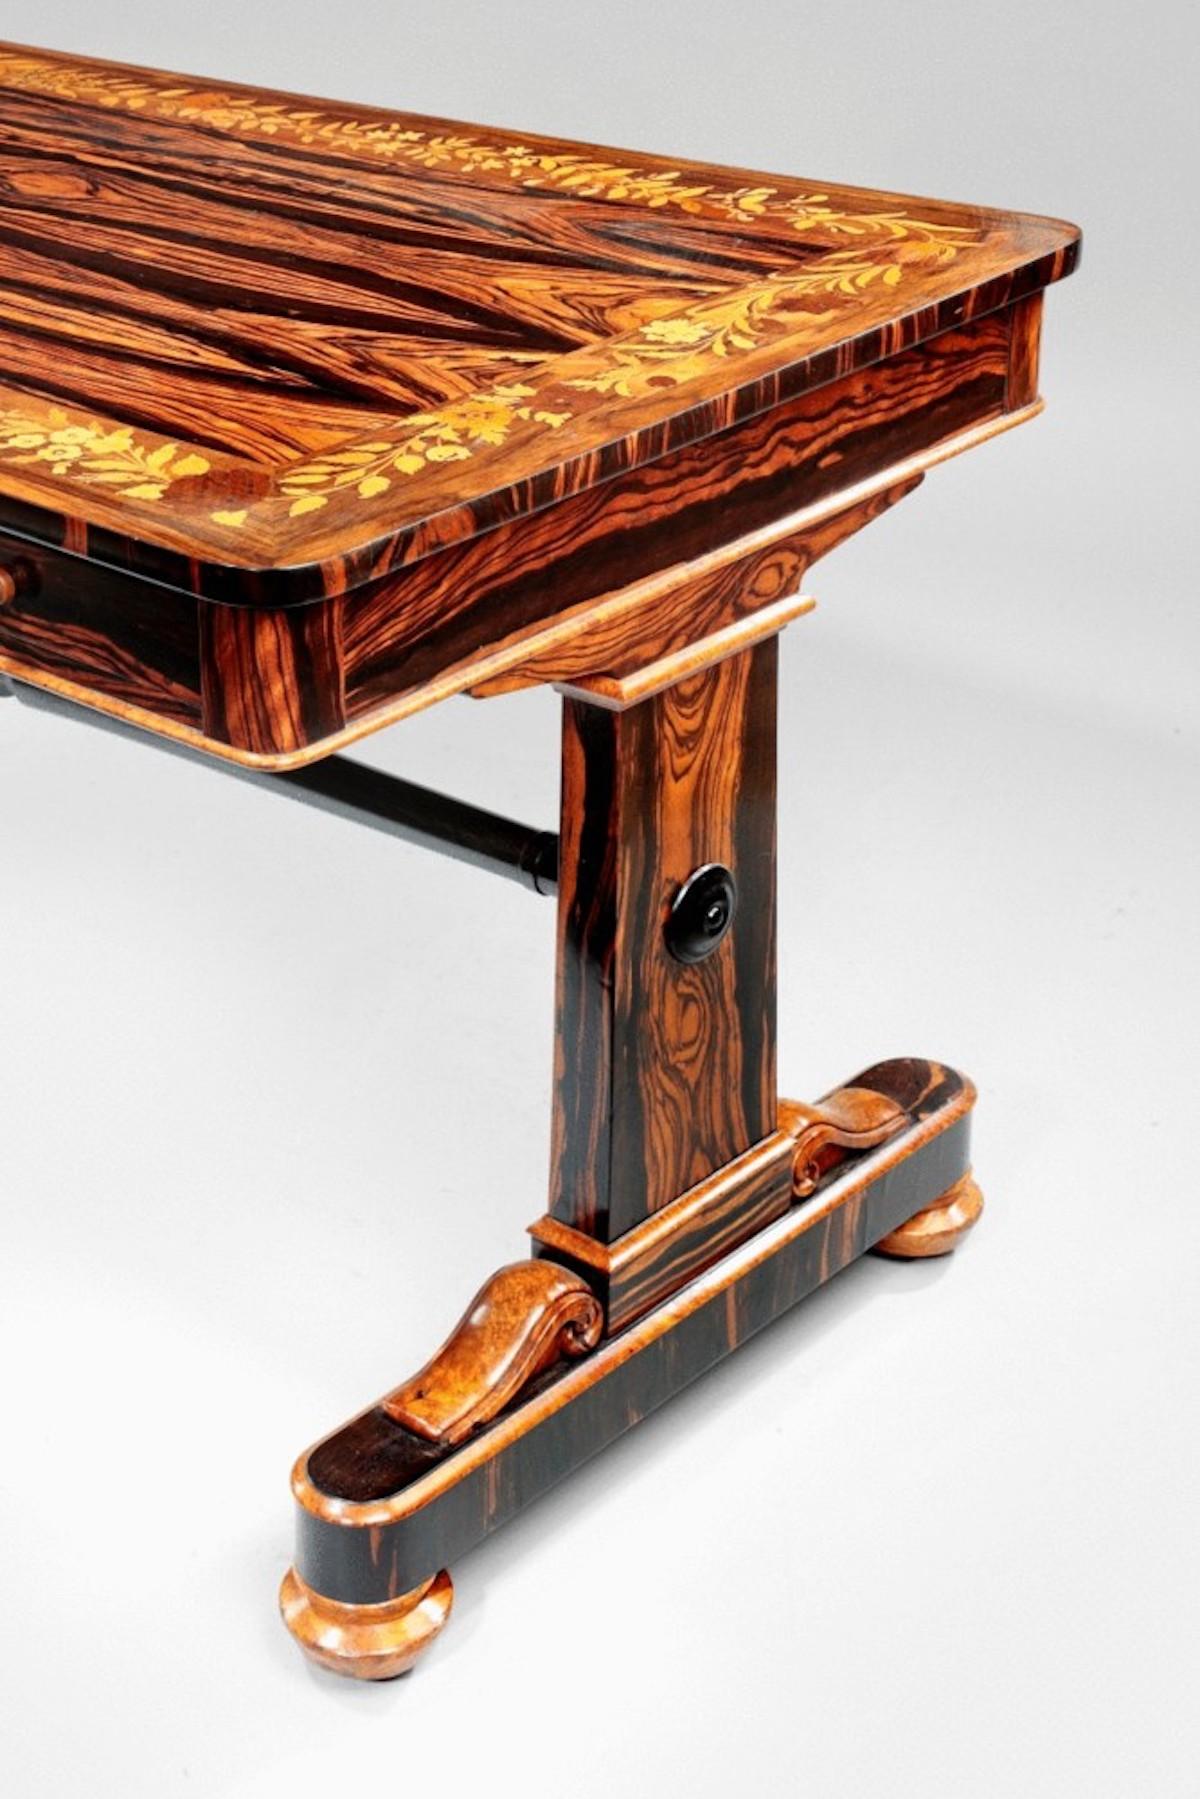 A rare late Regency marquetry library table inlaid with realistic depictions of flowers in a wide variety of exotic timbers, including coramandel, amboyna and walnut.